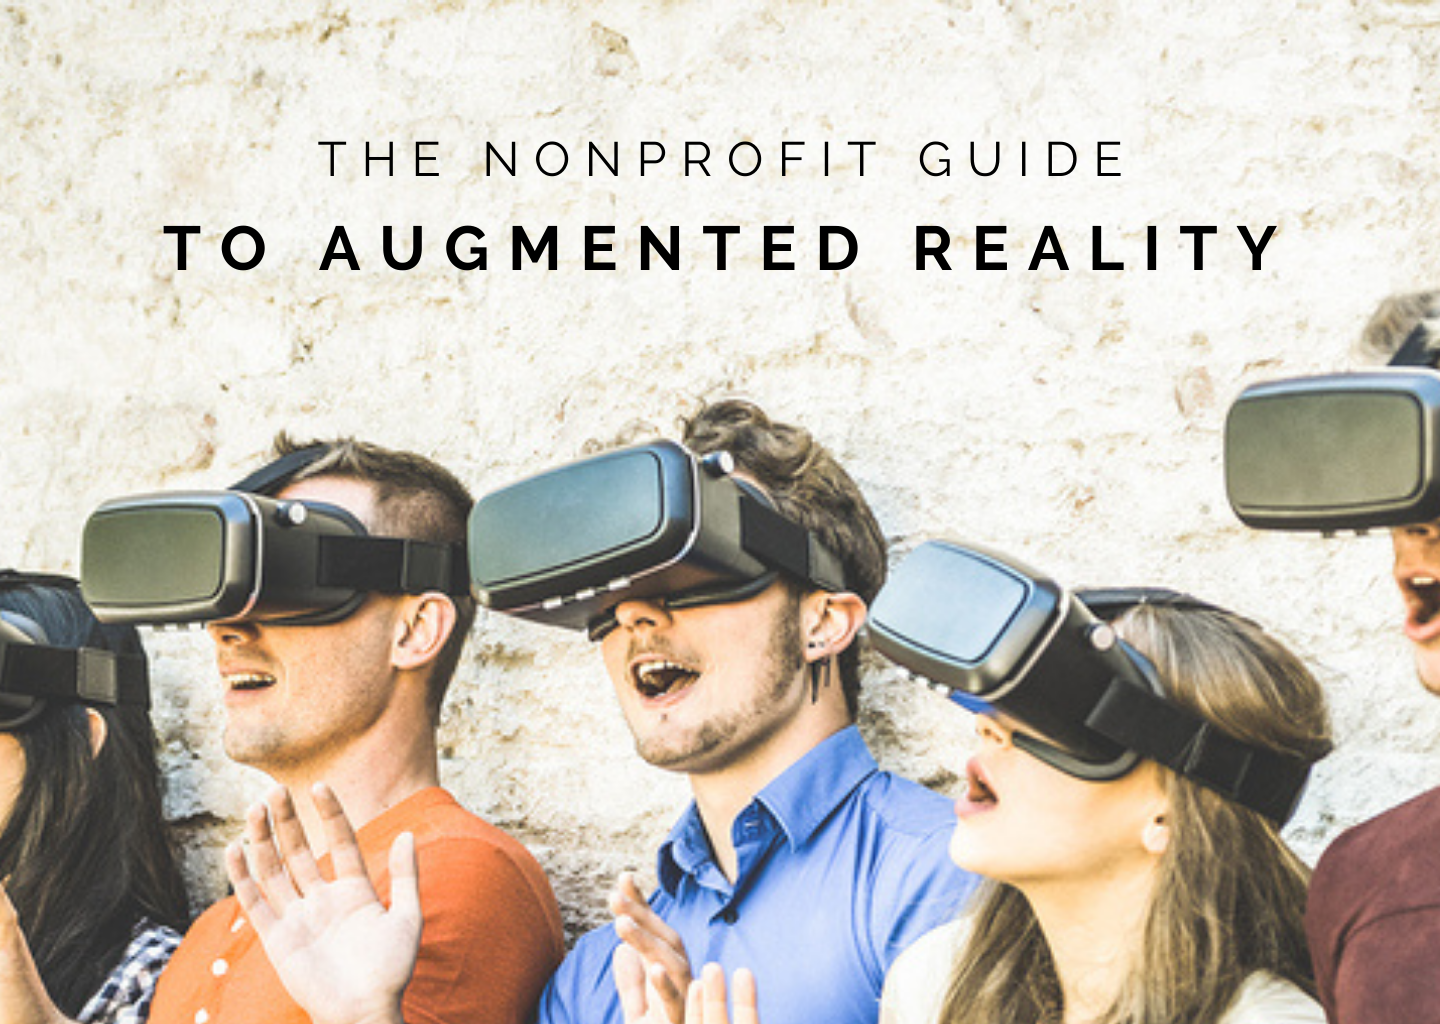 Top 11 Augmented Reality Games You Need To Try In 2022